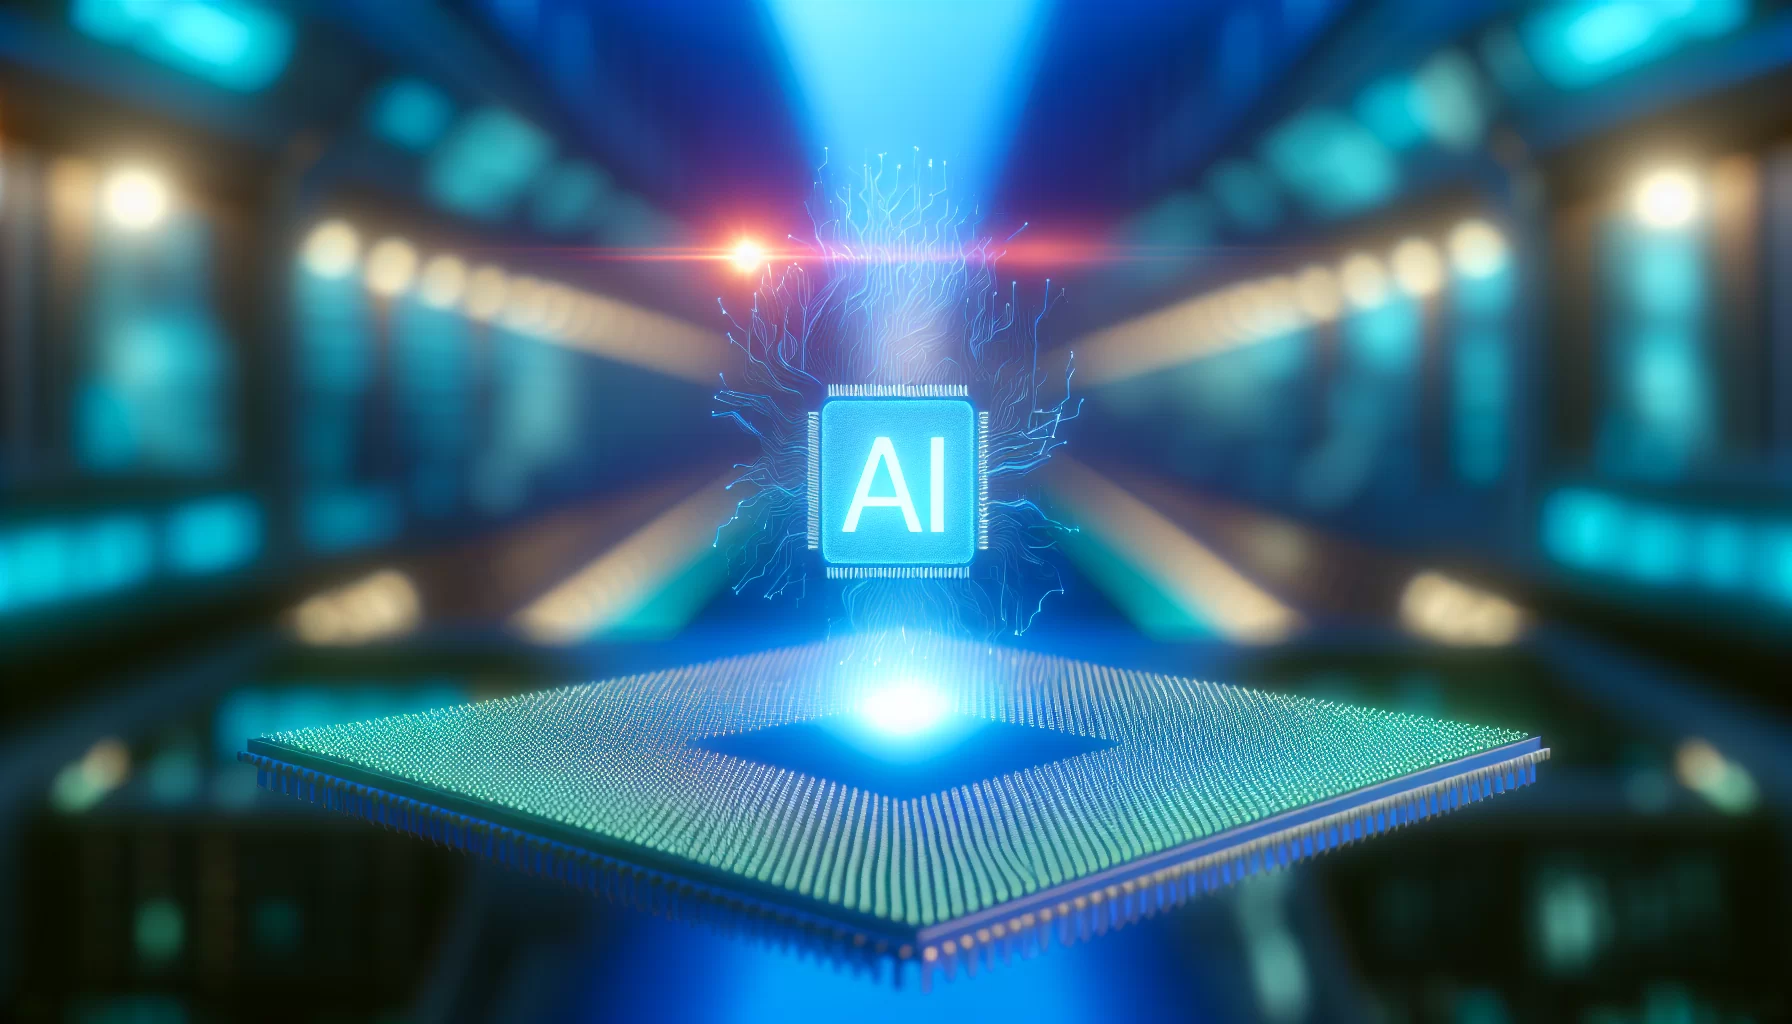 Intel's visionary leap: democratizing AI with innovative chip technology